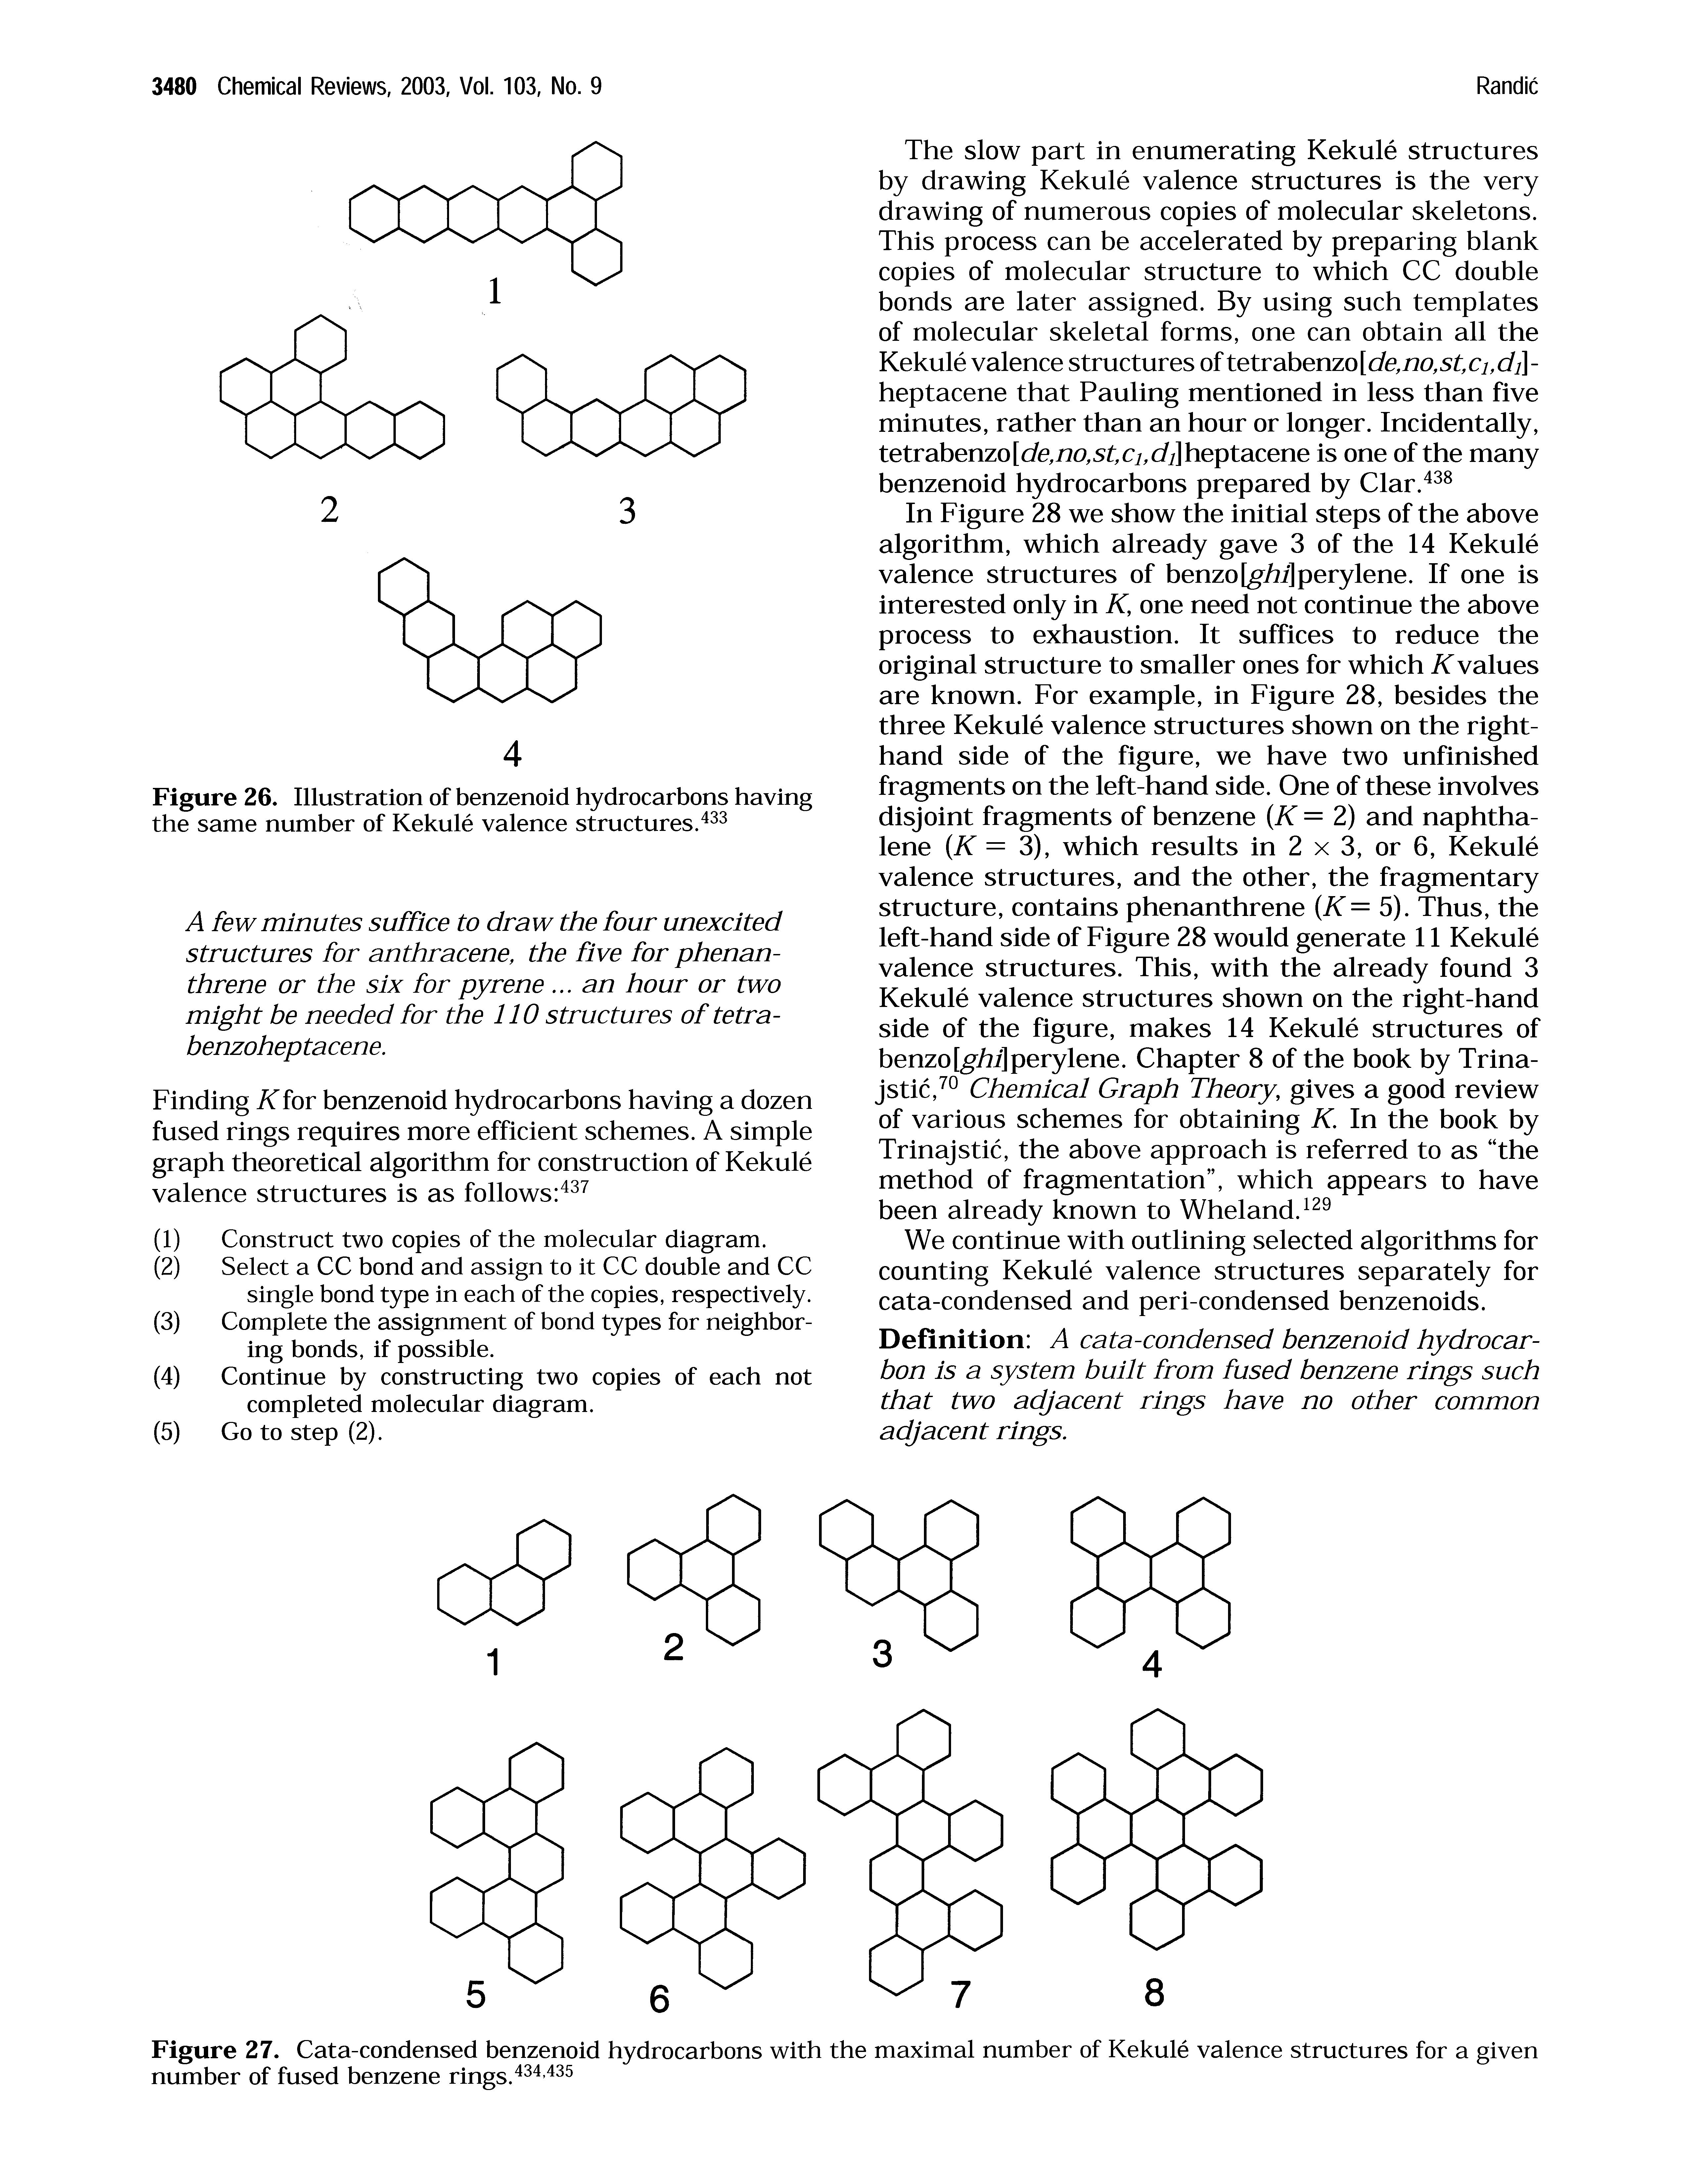 Figure 27. Cata-condensed benzenoid hydrocarbons with the maximal number of Kekule valence structures for a given number of fused benzene rings.